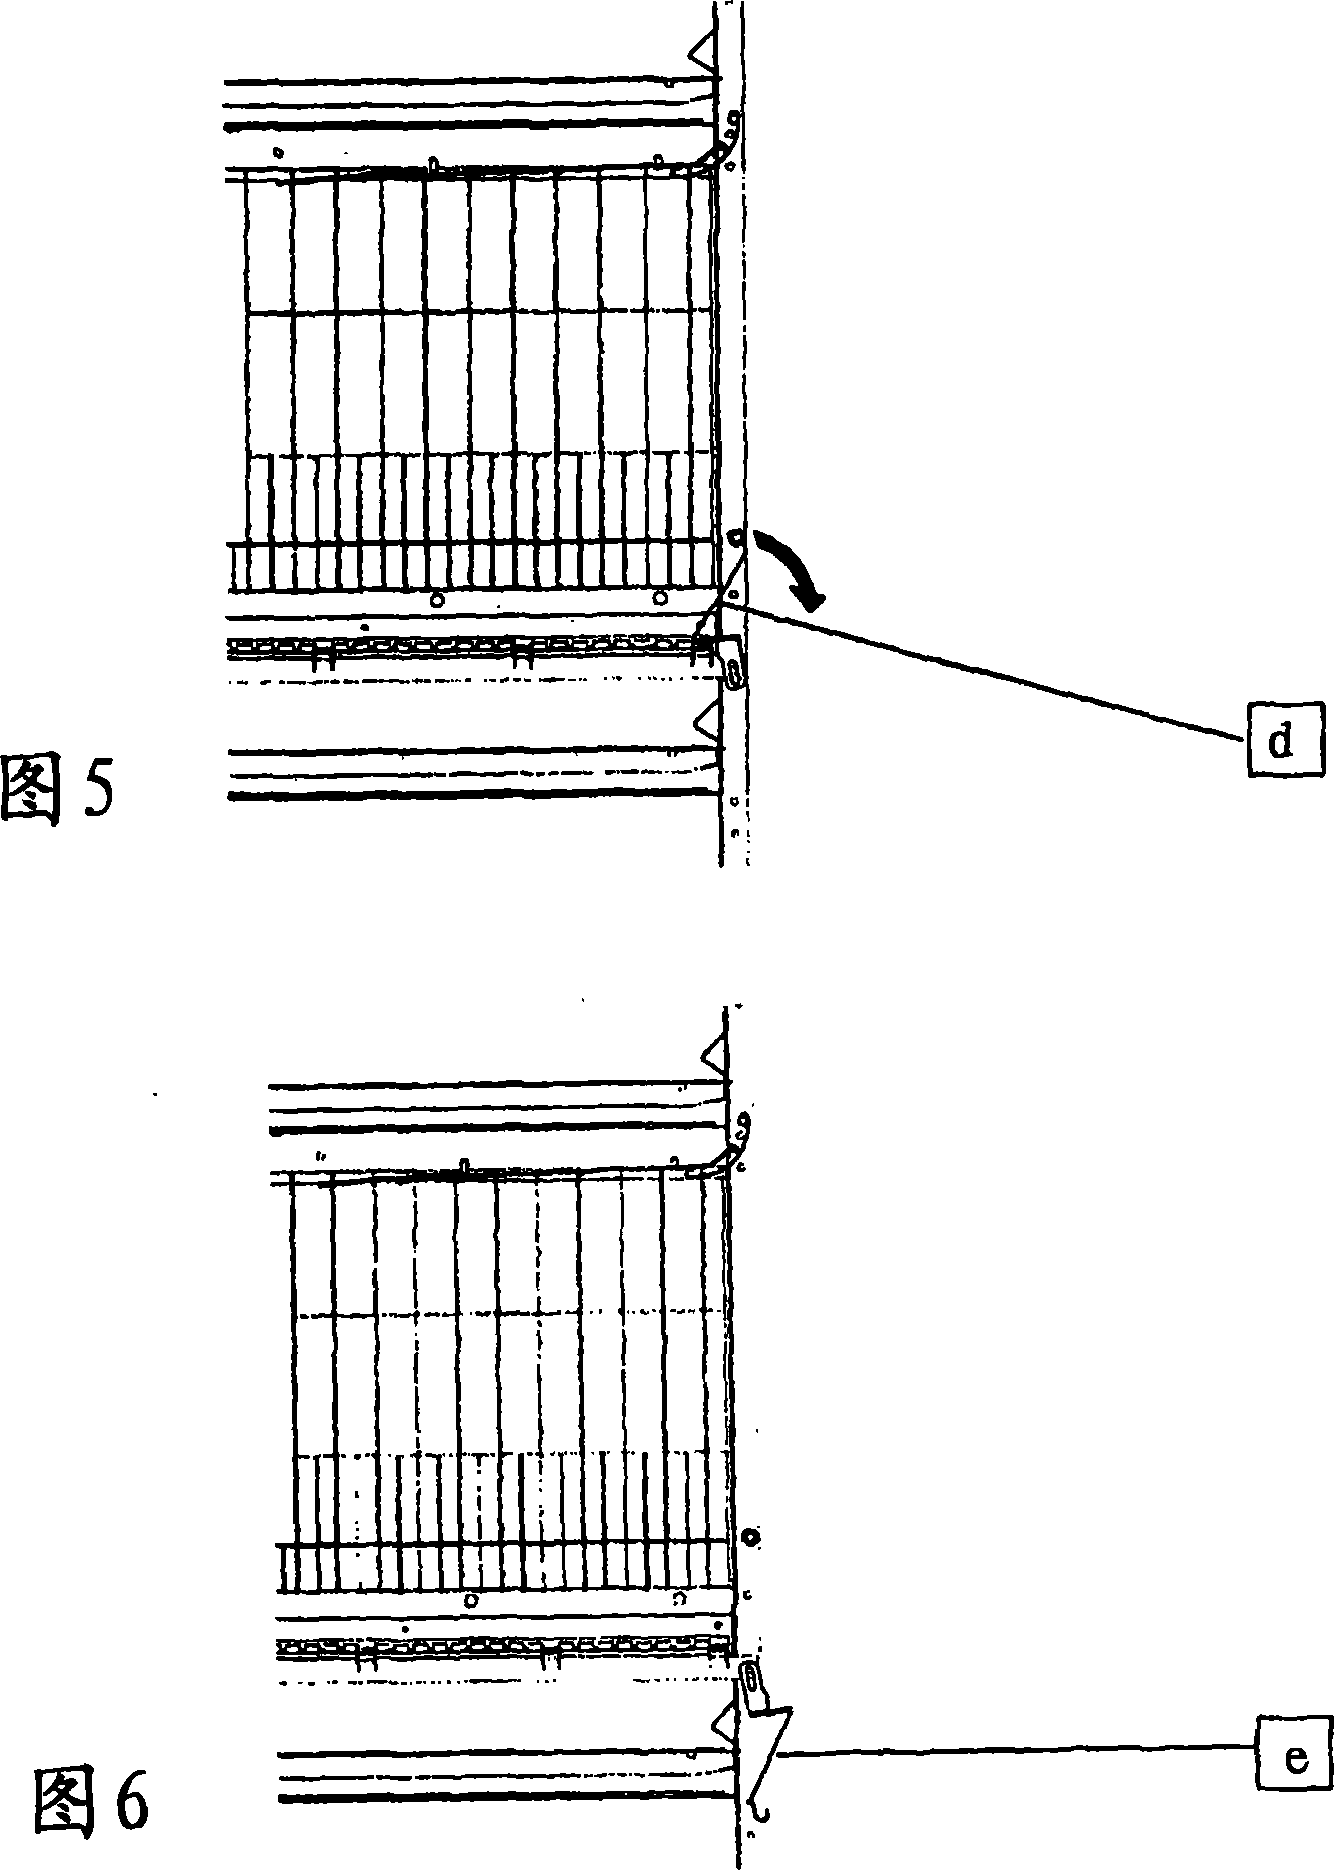 Poultry cage rearing system